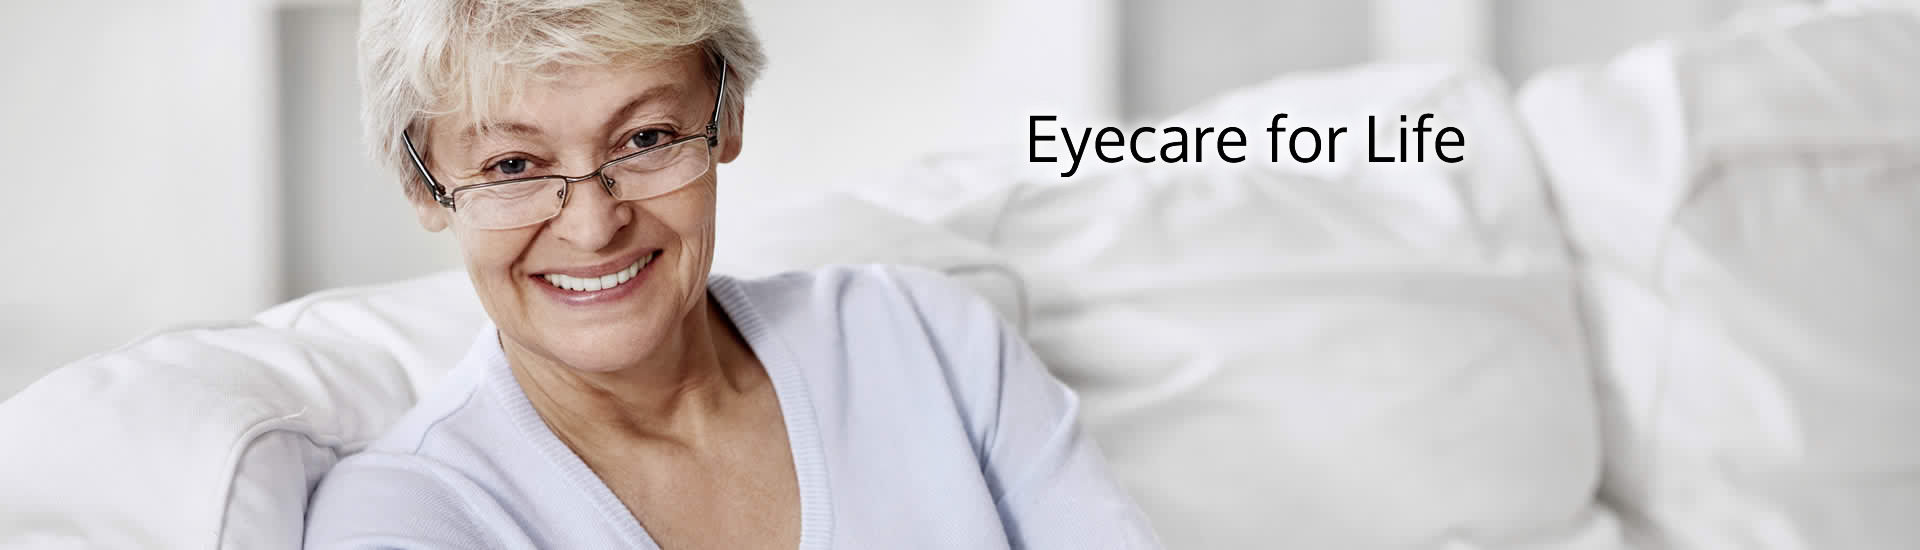 Eyecare for Life